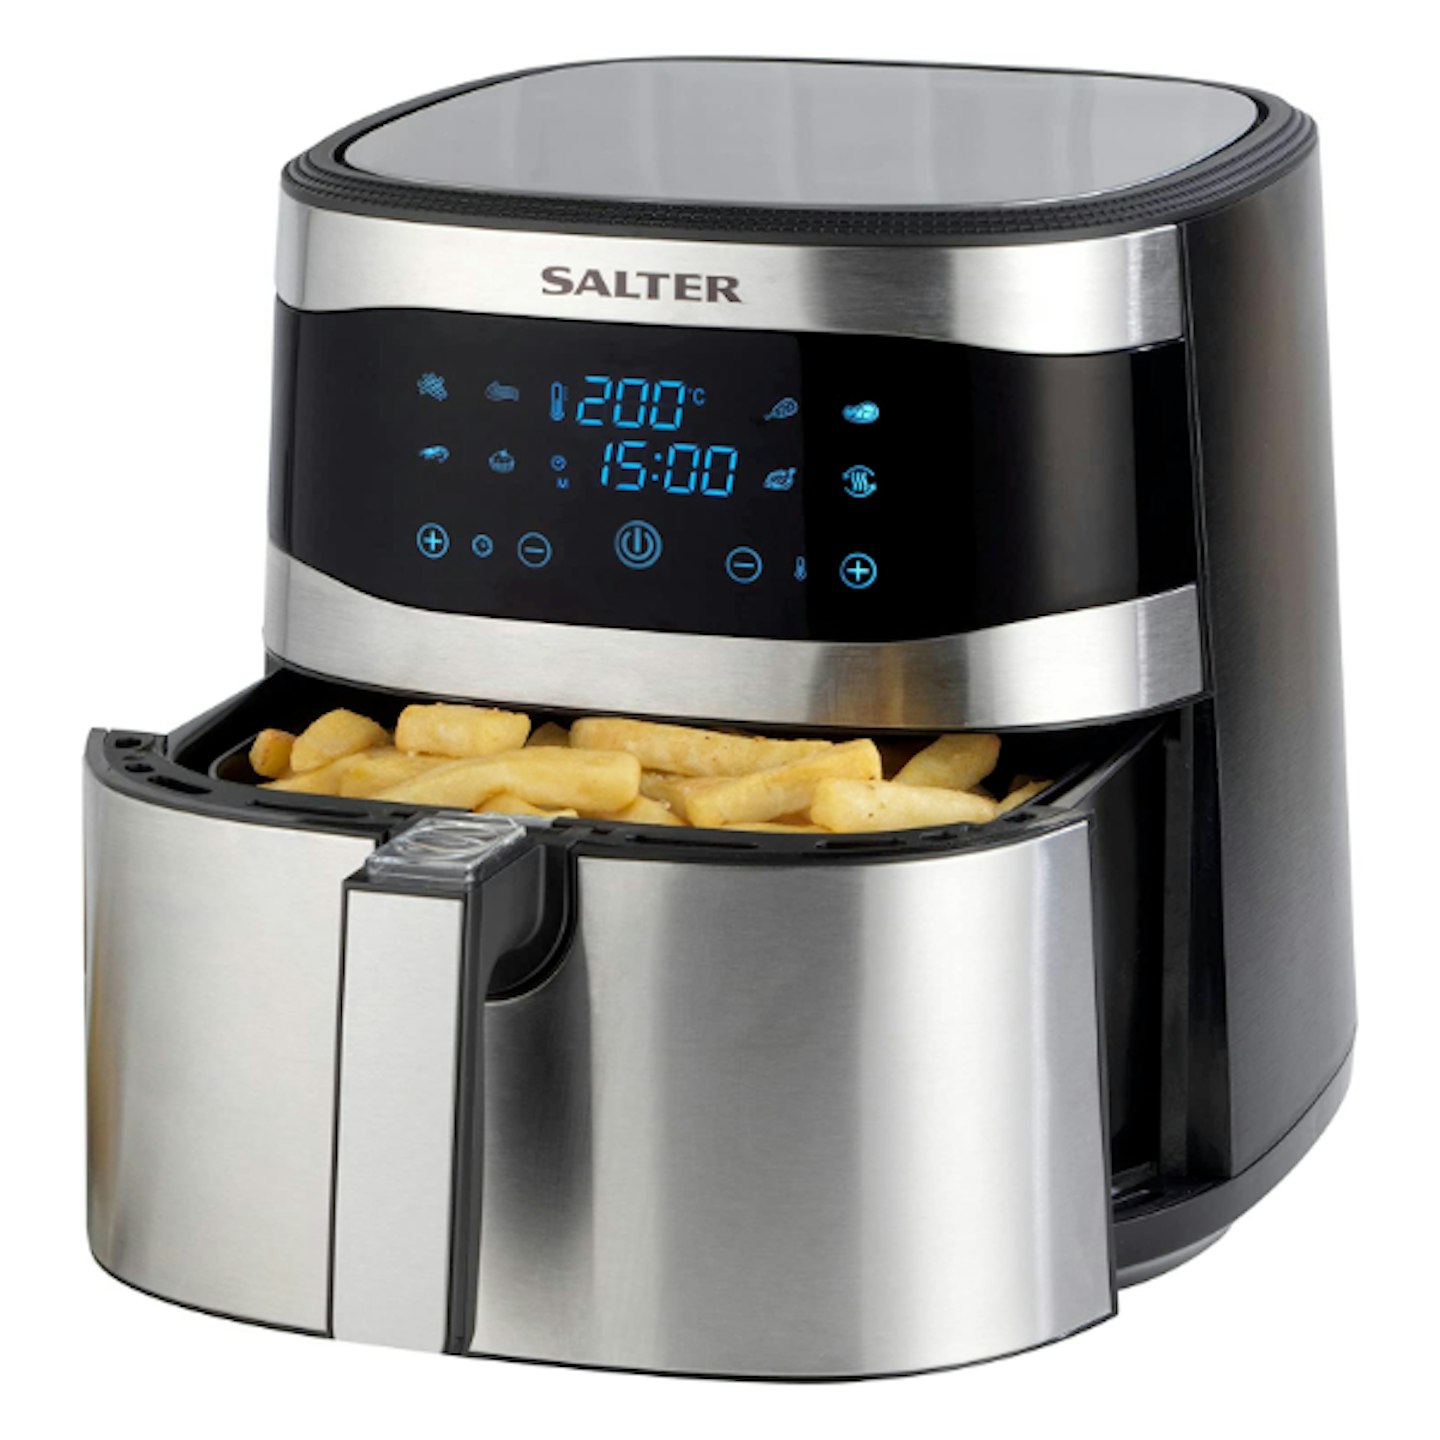 Salter Dual Pro Cook Air Fryer Review 2022